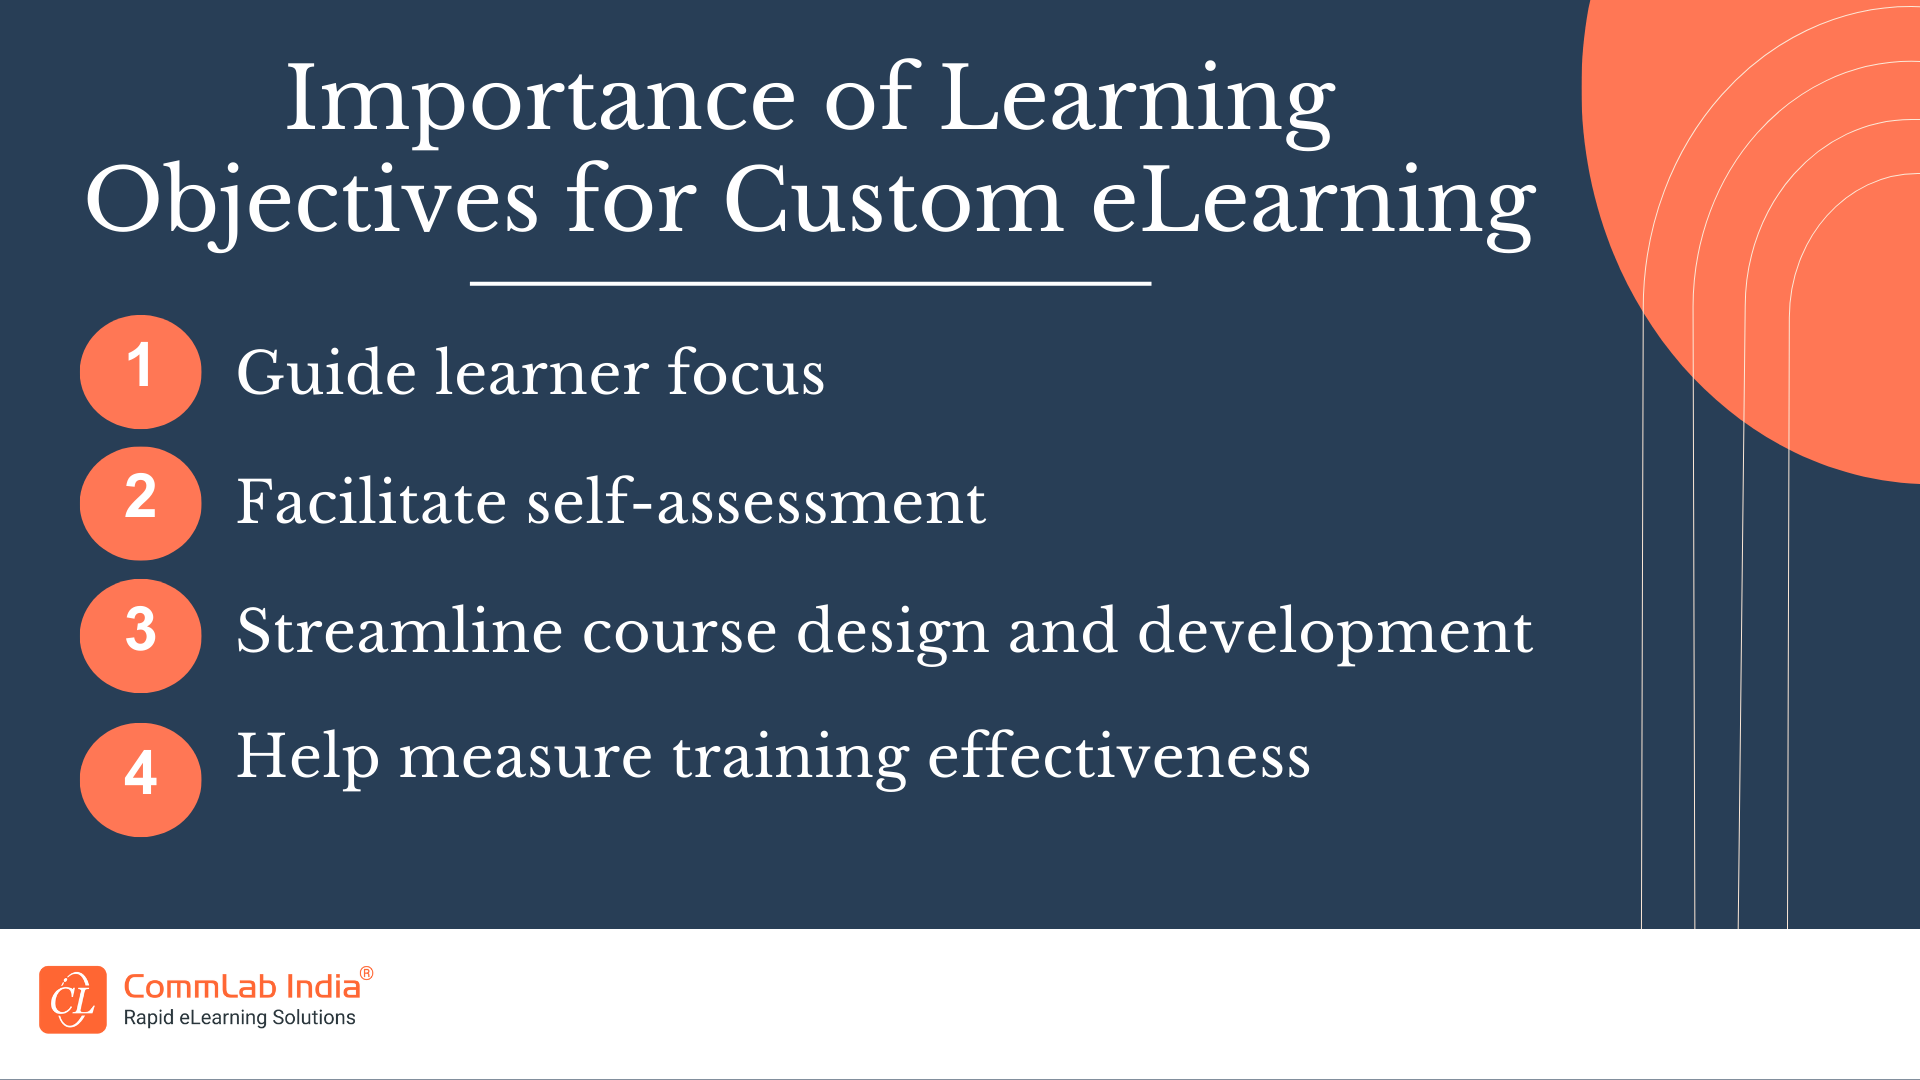 Importance of Learning Objectives for Custom eLearning